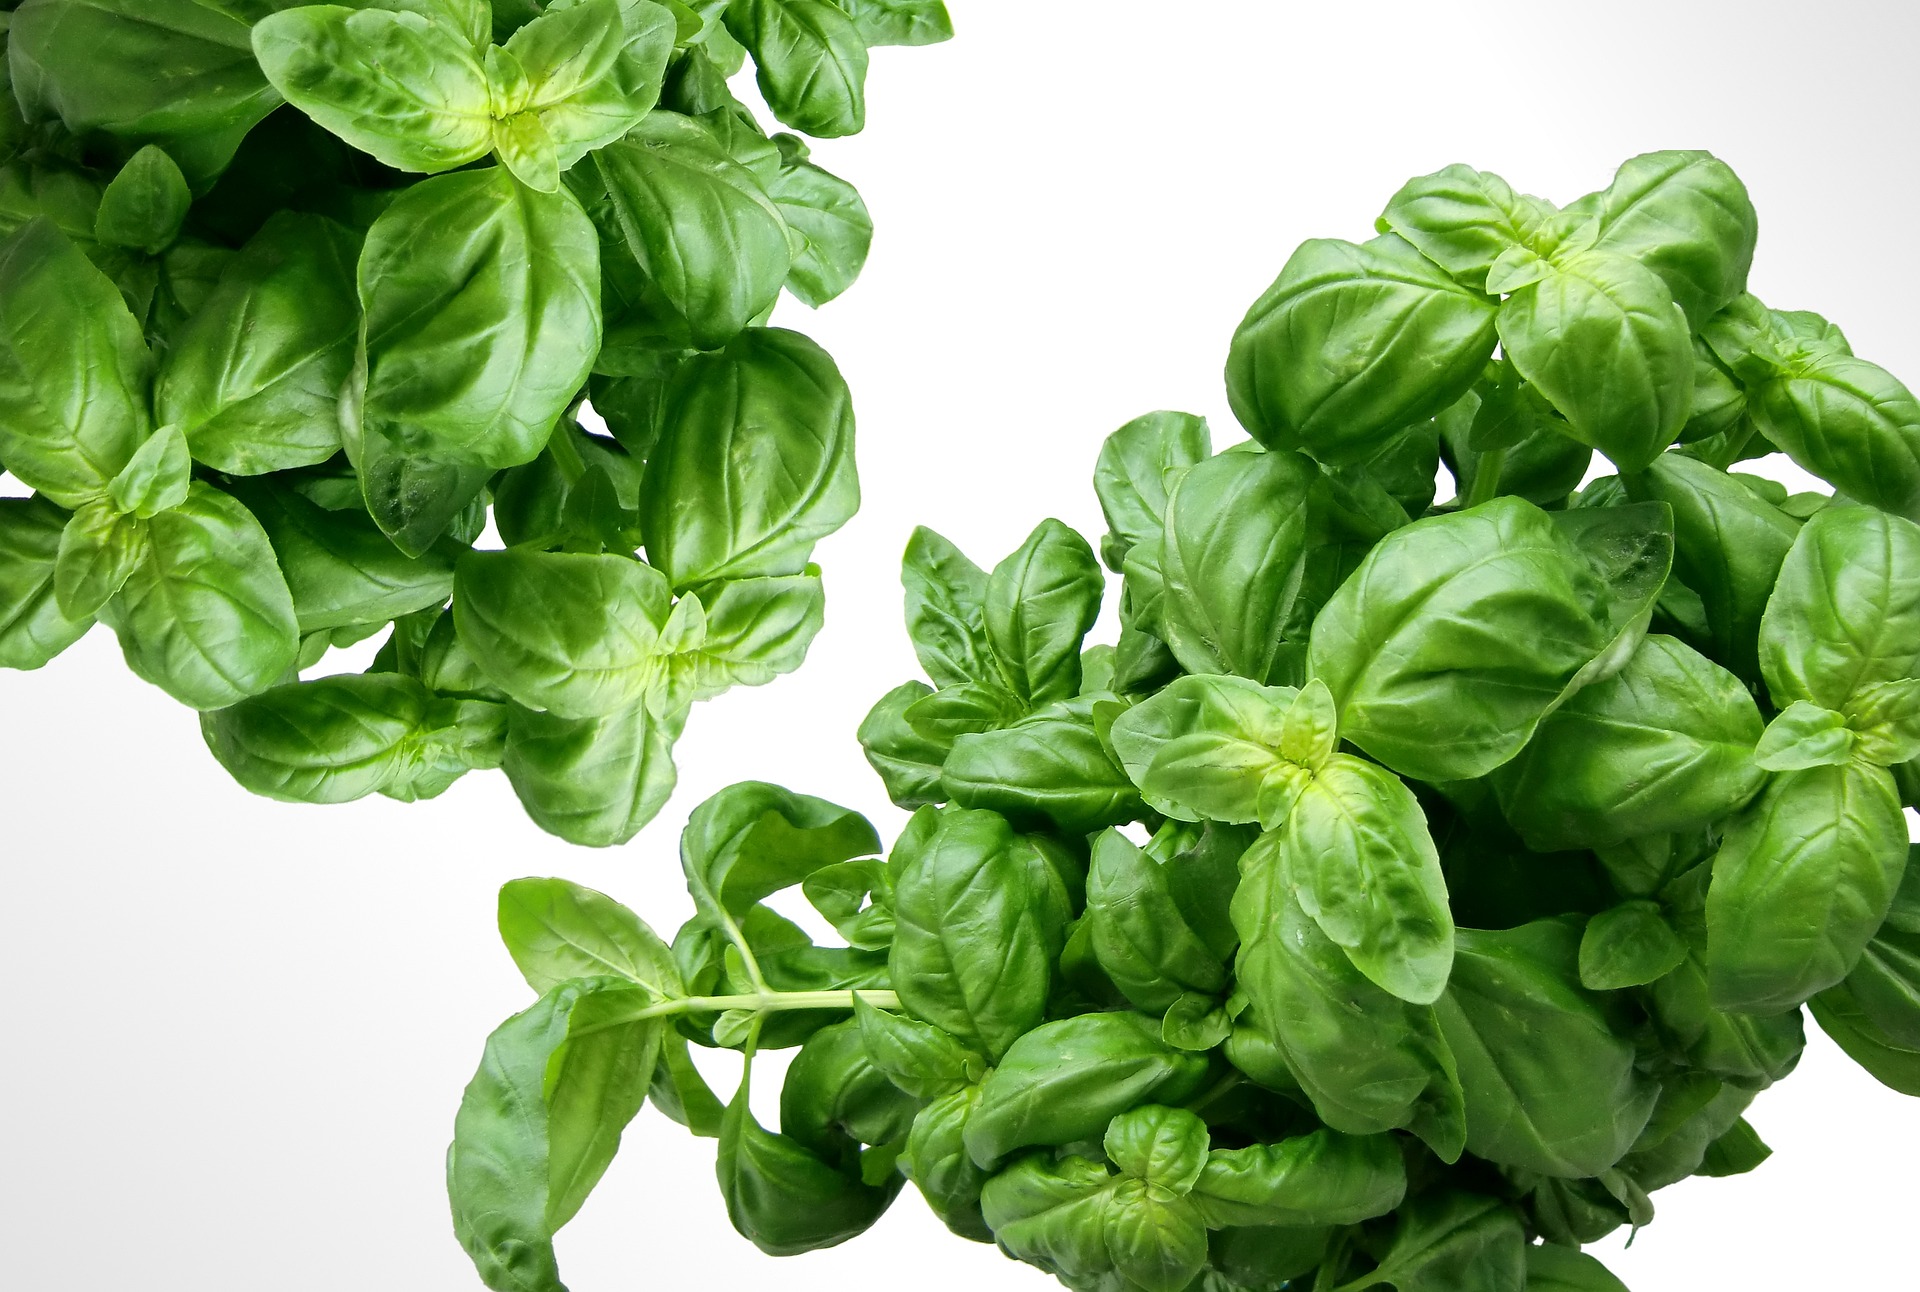 How to Benefit From Amazing Herb Basil By Including in Your Daily Diet